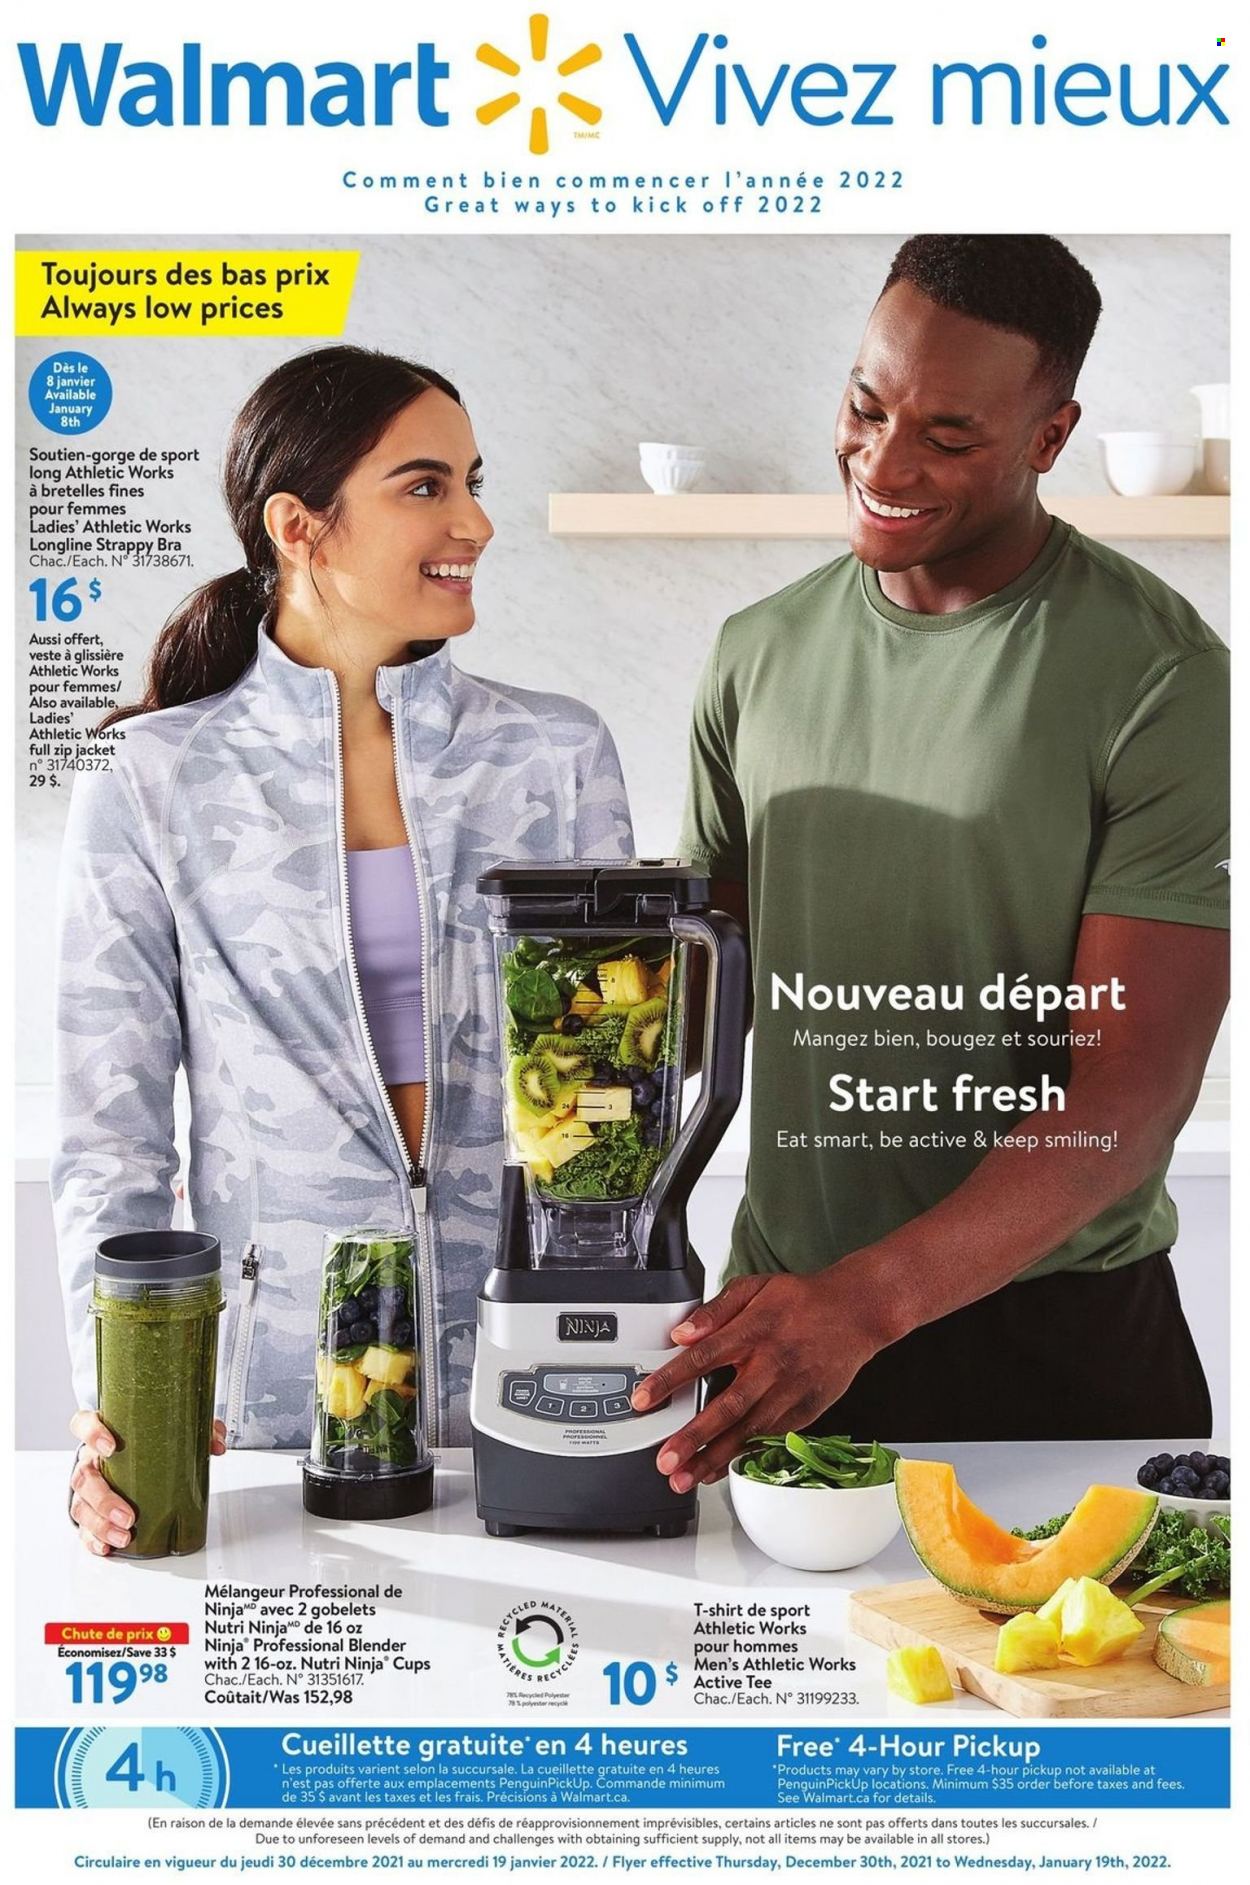 Walmart Flyer - December 30, 2021 - January 19, 2022 - Sales products - cup, jacket, t-shirt, bra, blender. Page 1.